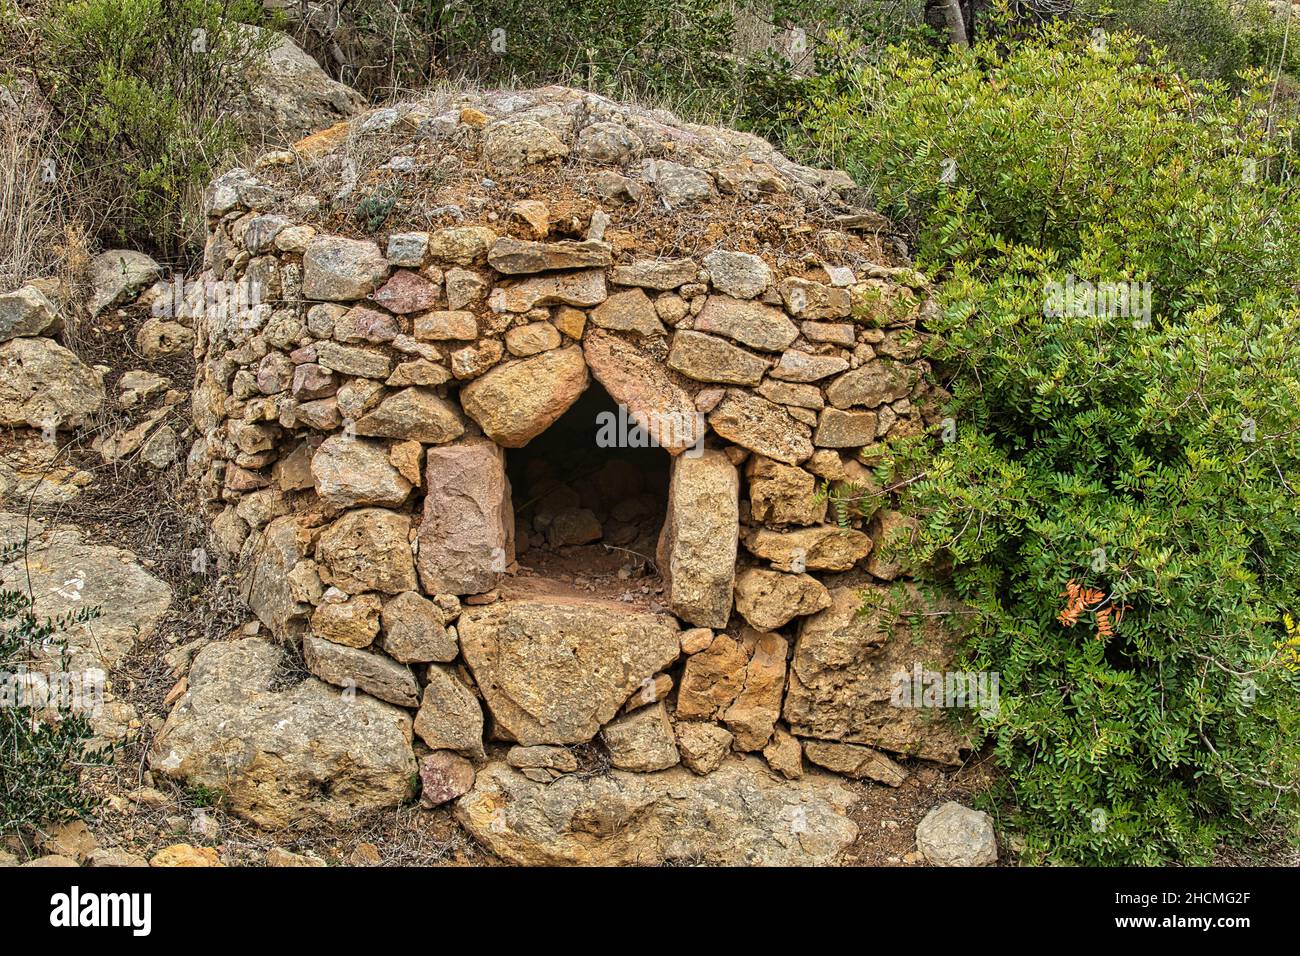 Old, but well preserved round oven, built from blocks of natural stone, in the Mediterranean forest near Paderne, Algarve, Portugal Stock Photo